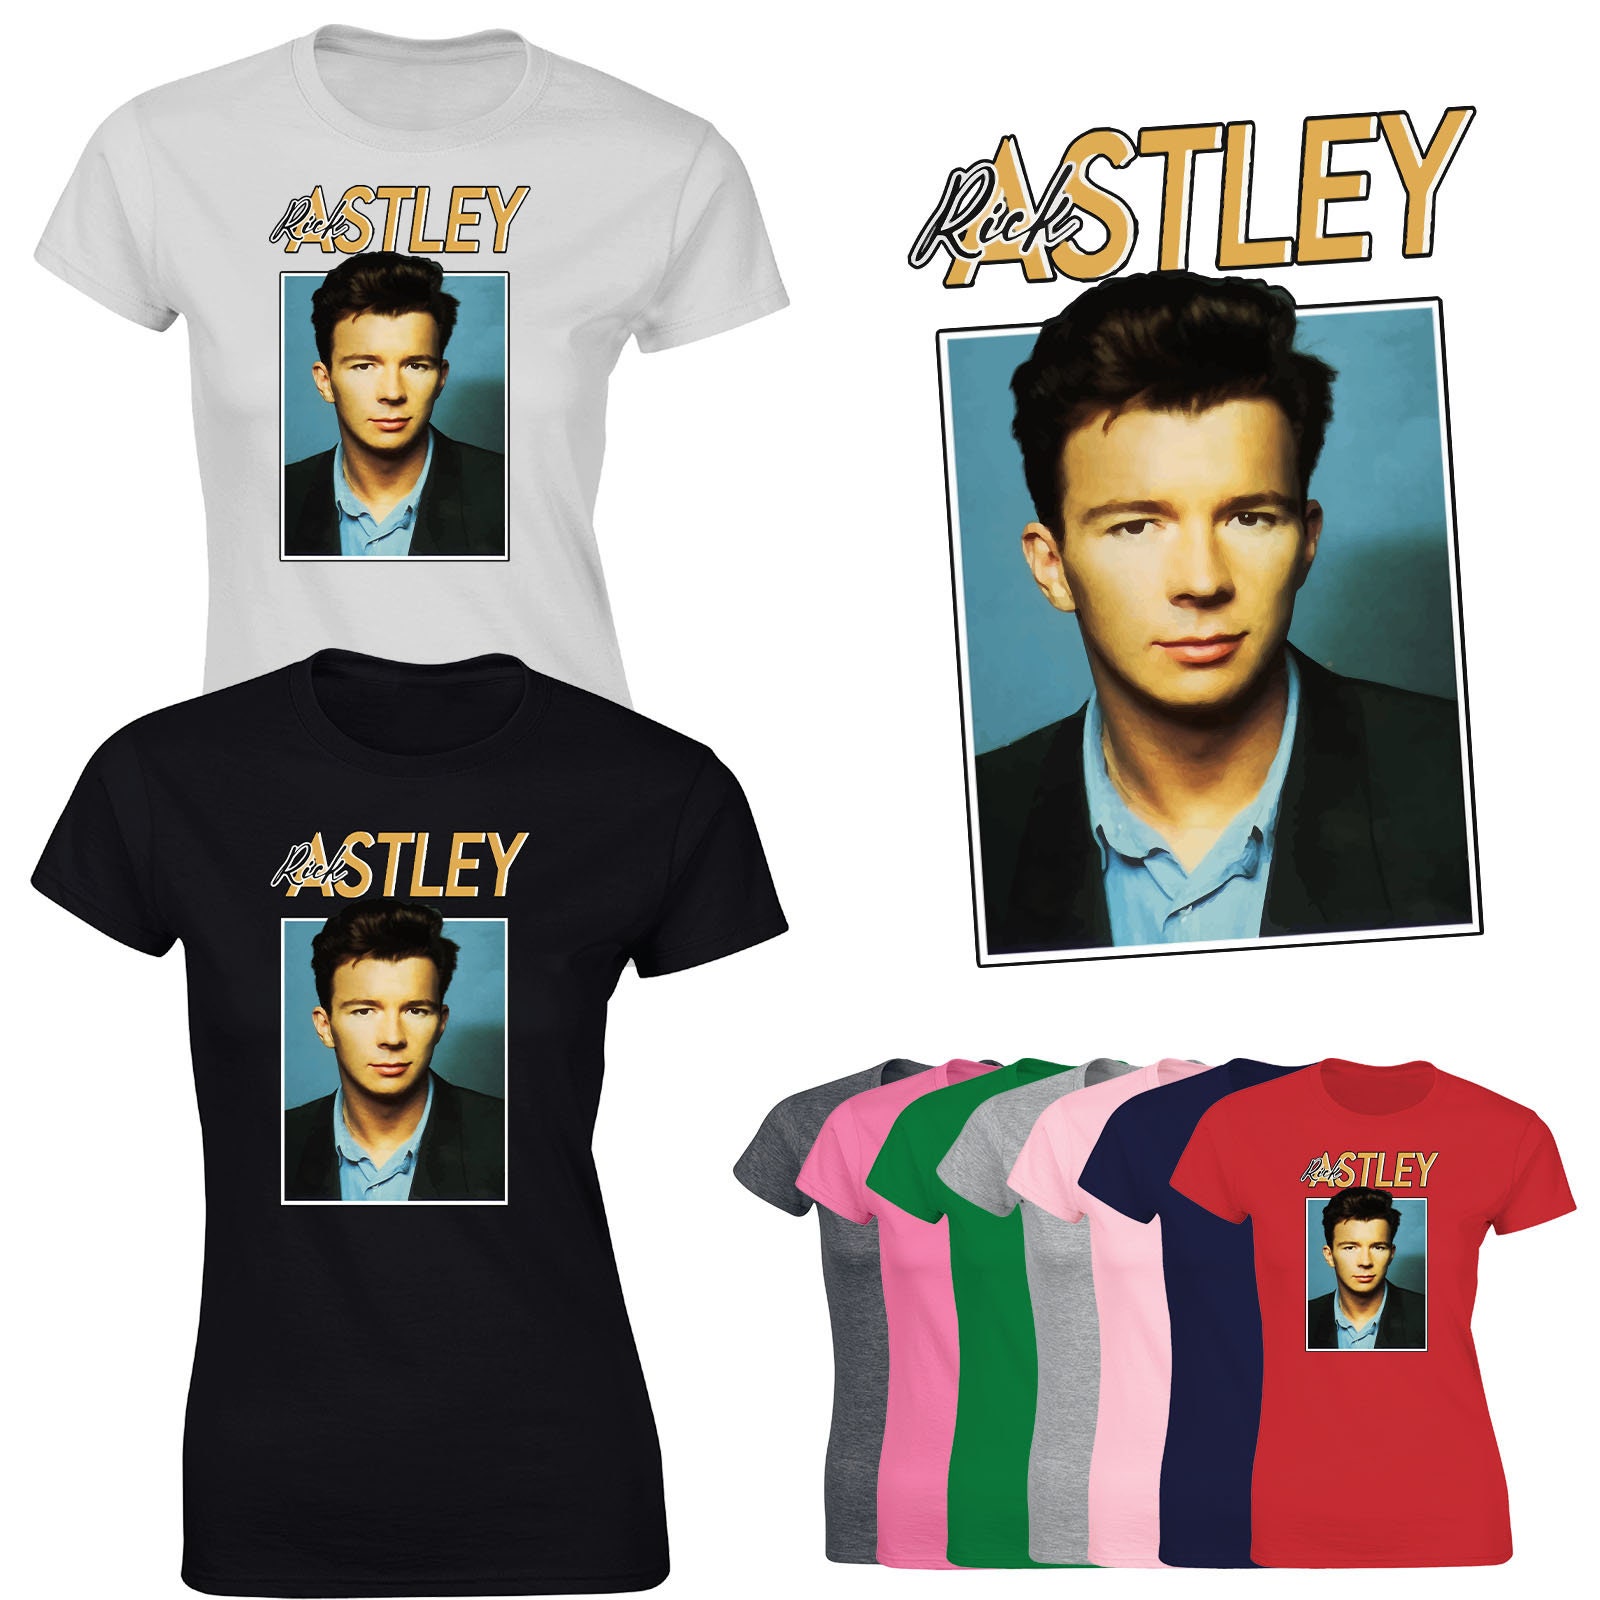 Rick Astley For Prime Minister - Womens T-Shirt - 80s 80's Rolled Song  Lyrics